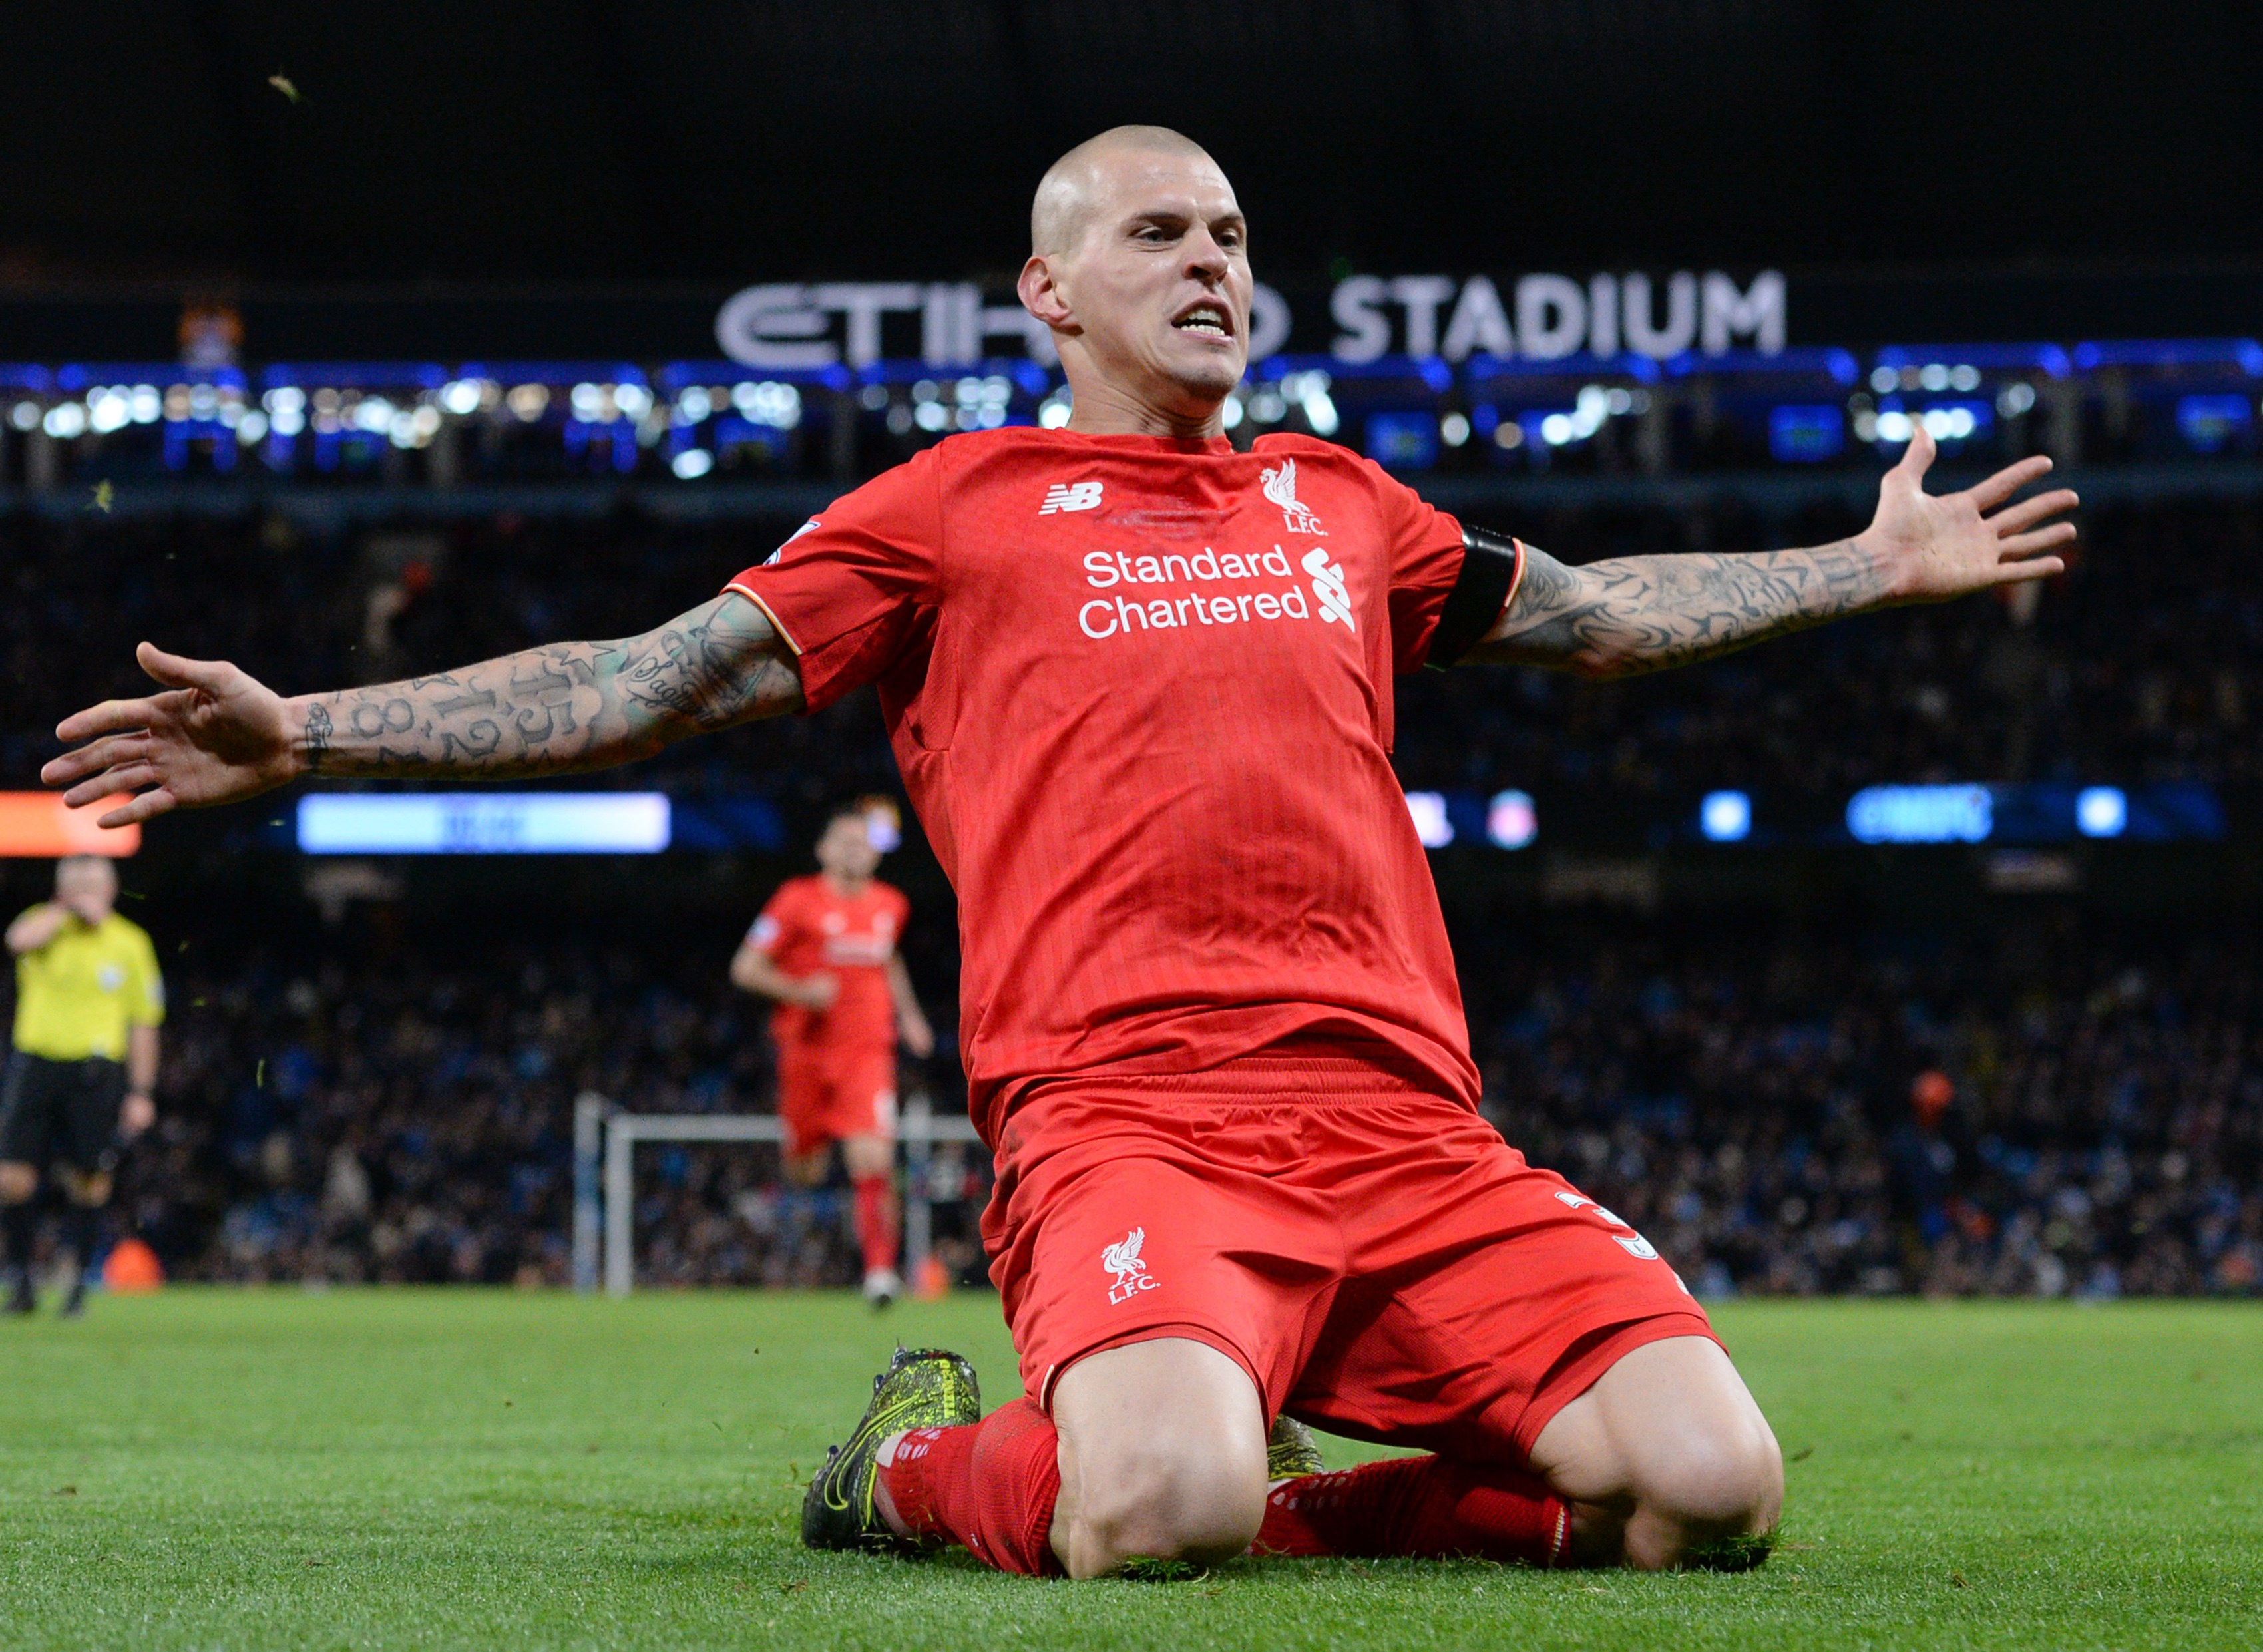 Liverpool's Slovakian defender Martin Skrtel celebrates after scoring their fourth goal of the English Premier League football match between Manchester City and Liverpool at The Etihad stadium in Manchester, north west England on November 21, 2015. AFP PHOTO / OLI SCARFF

RESTRICTED TO EDITORIAL USE. No use with unauthorized audio, video, data, fixture lists, club/league logos or 'live' services. Online in-match use limited to 75 images, no video emulation. No use in betting, games or single club/league/player publications.        (Photo credit should read OLI SCARFF/AFP/Getty Images)